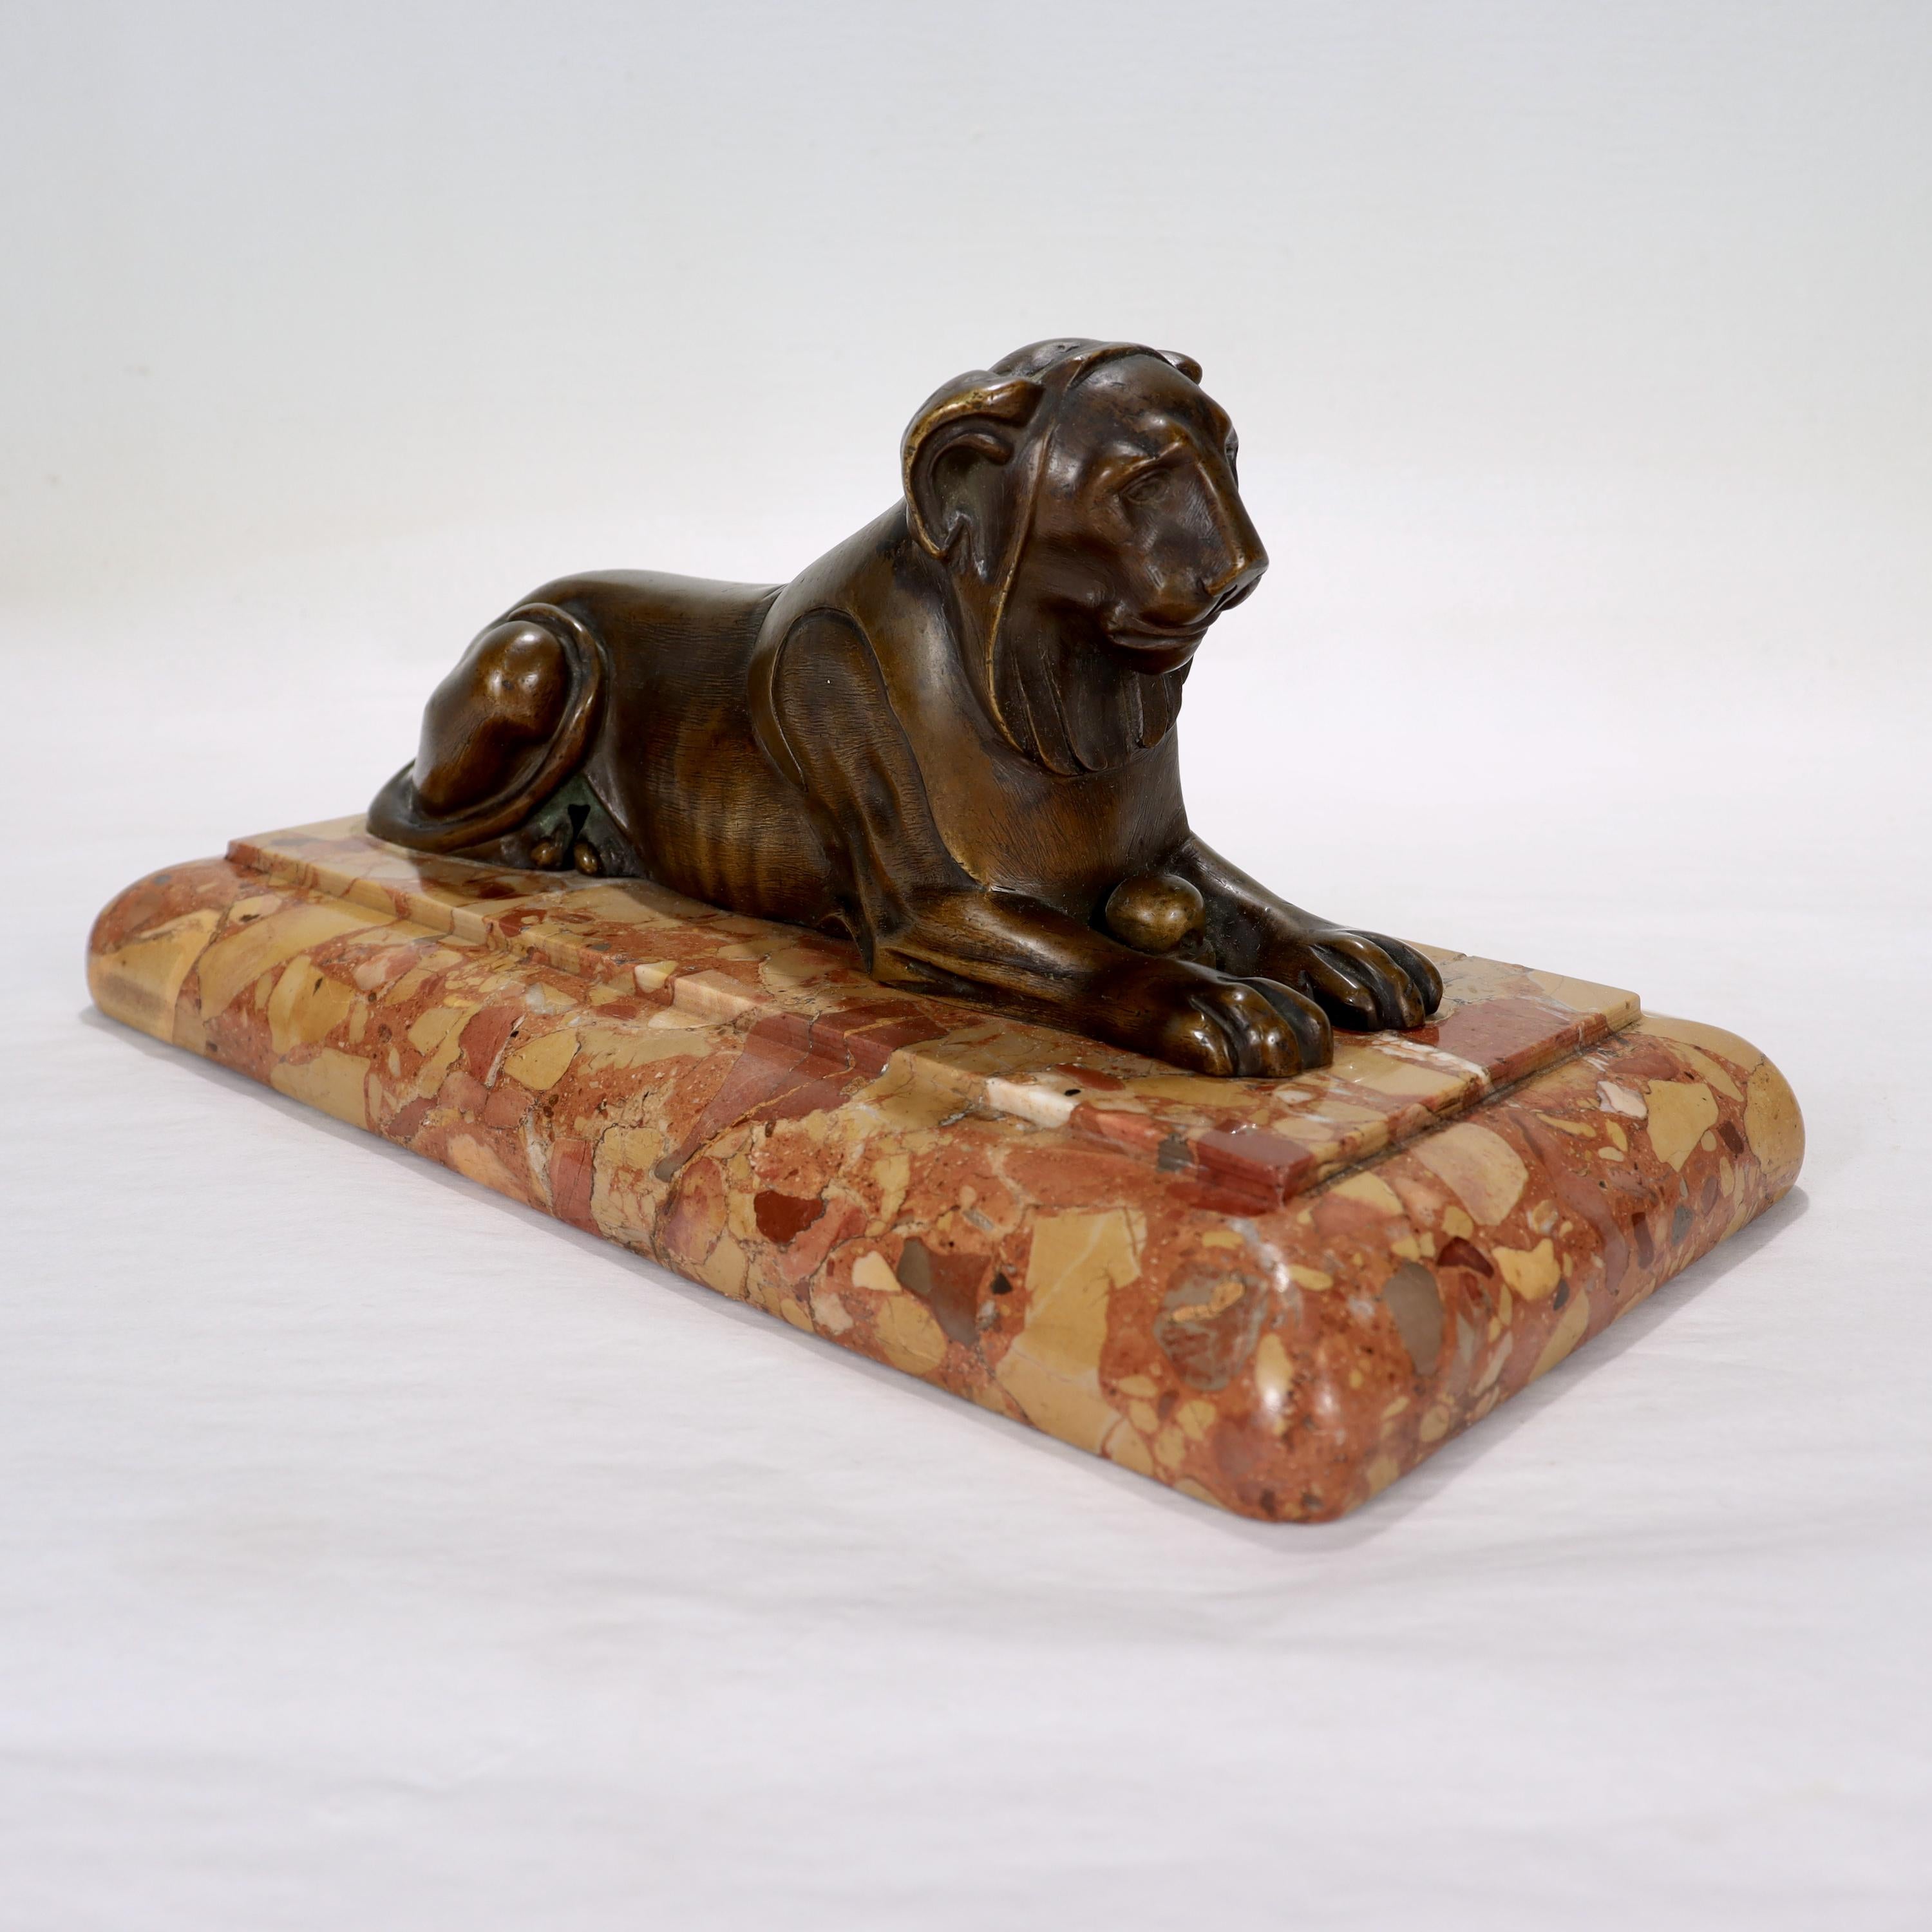 Antique Egyptian Revival Bronze Sculpture of a Lion on a Marble Plinth In Good Condition For Sale In Philadelphia, PA